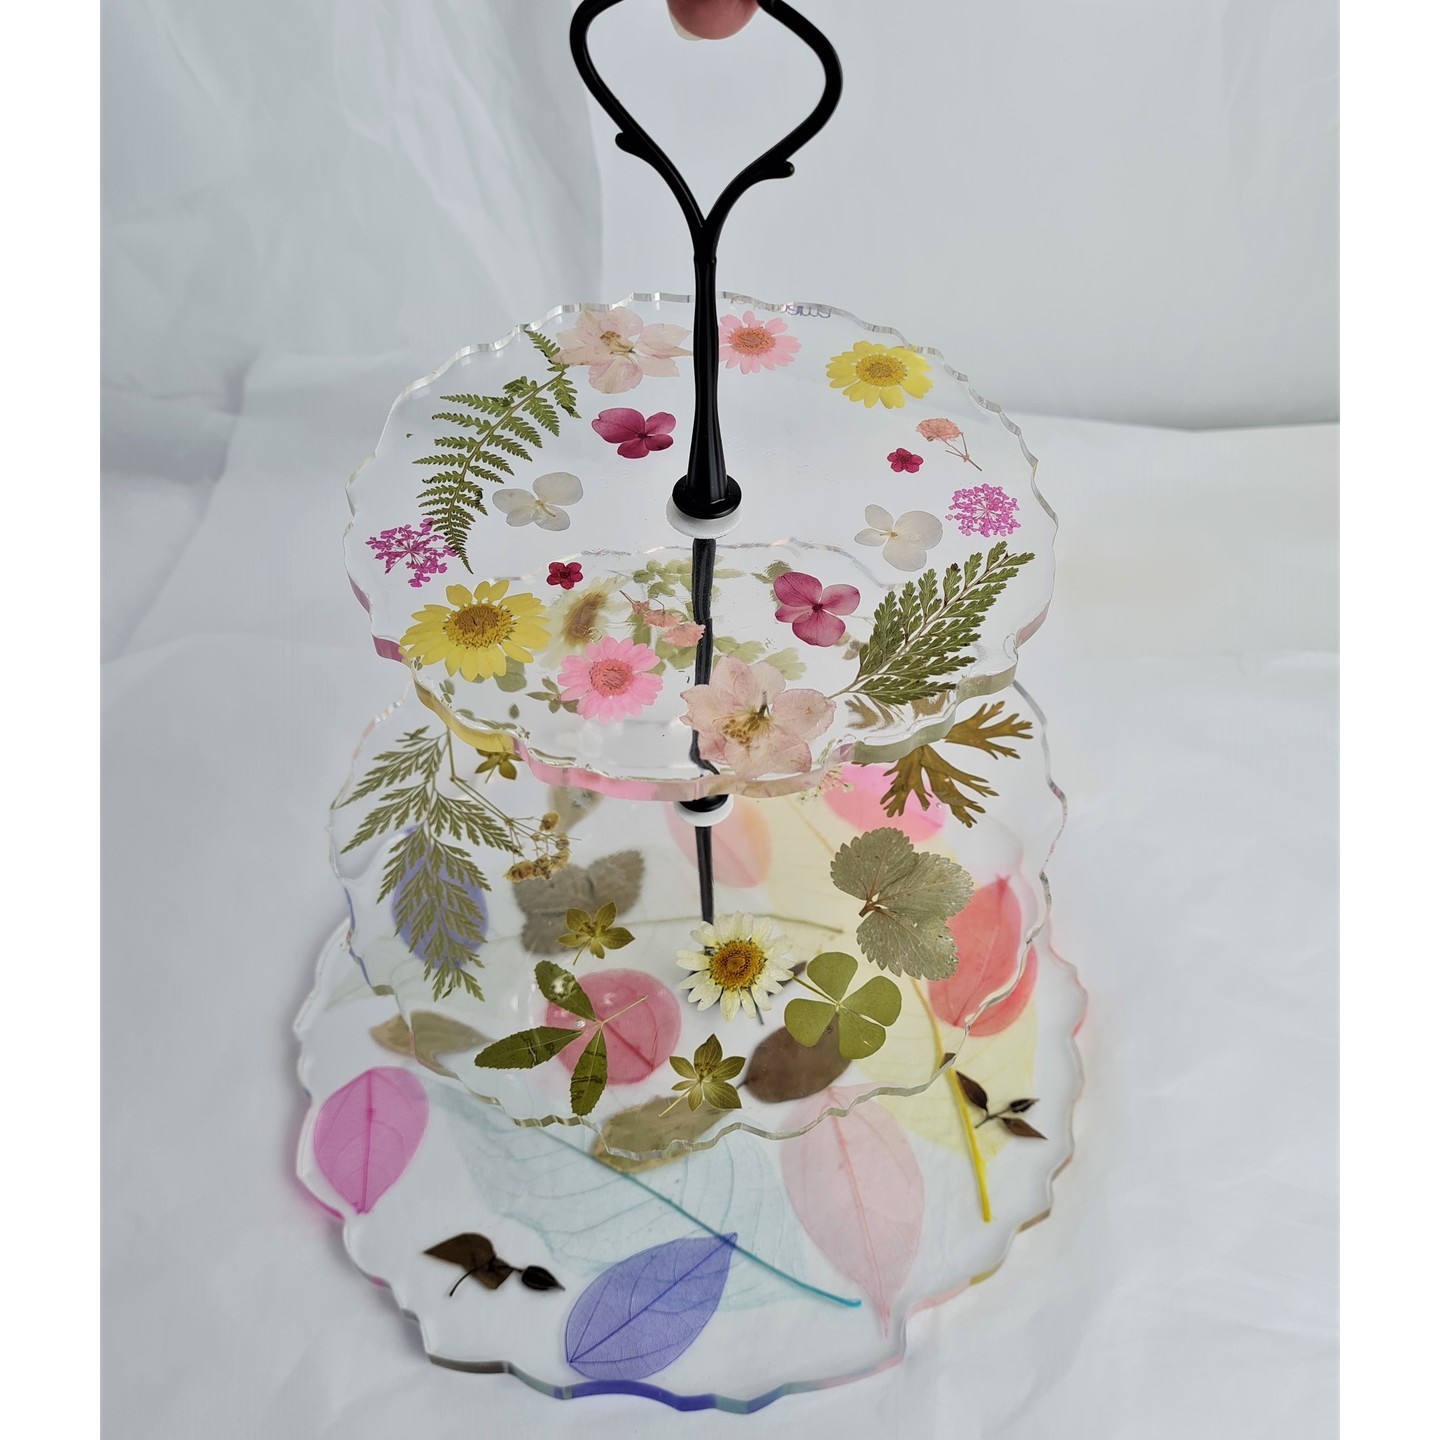 Blessed Mama Cake Display Flowers Galore Resin with real flowers & leaves Handmade by PWD